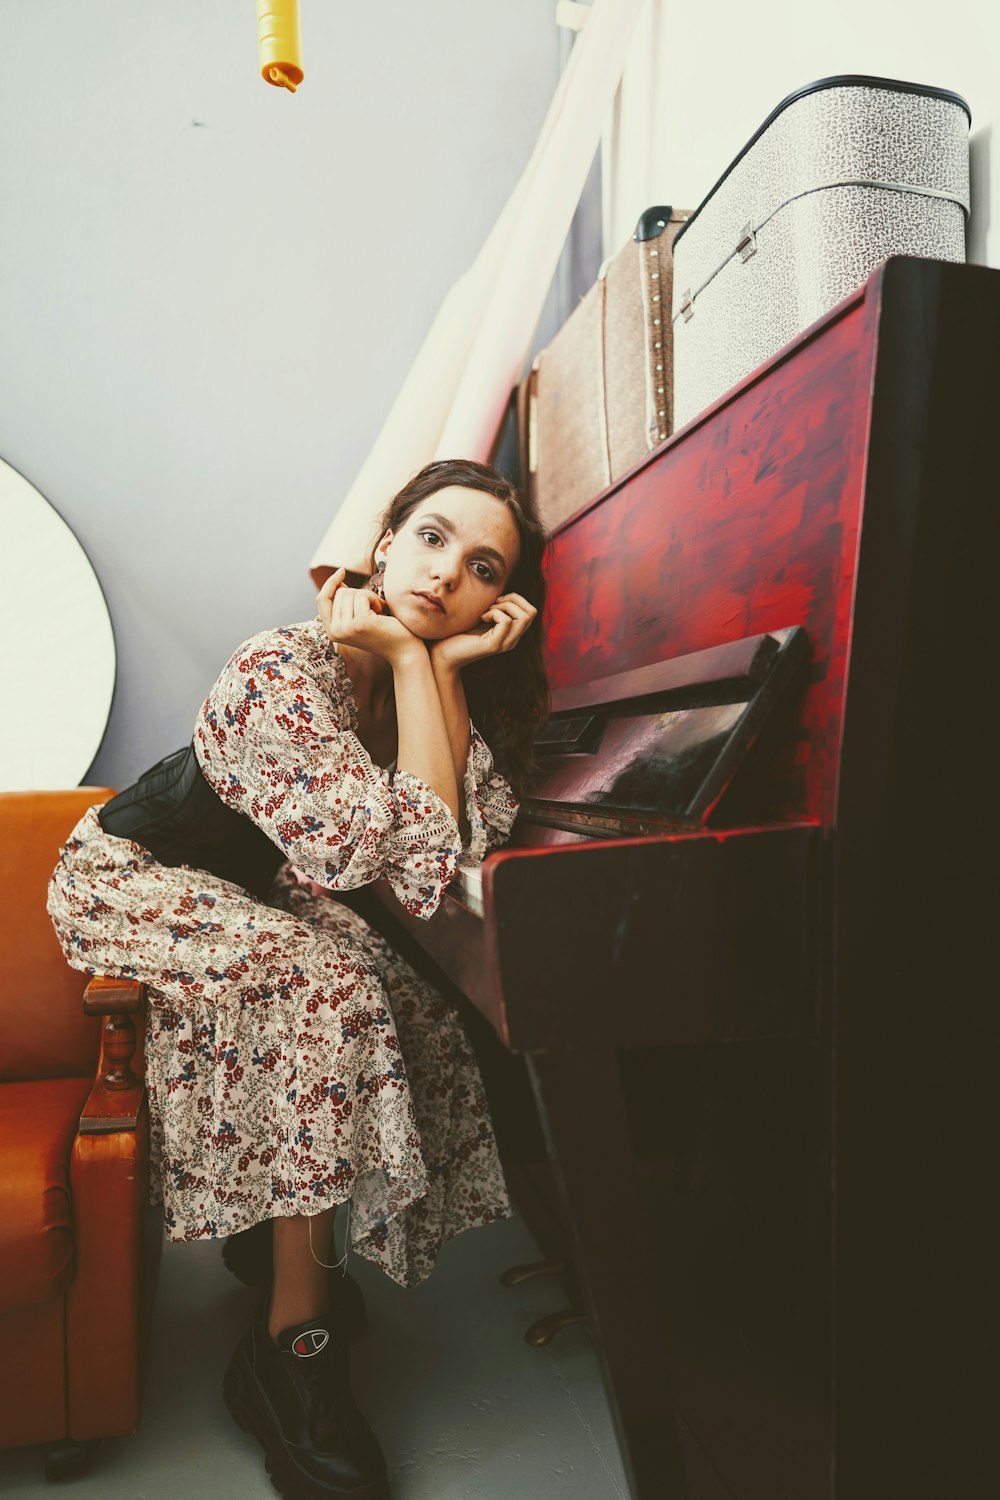 woman leaning on upright piano inside room